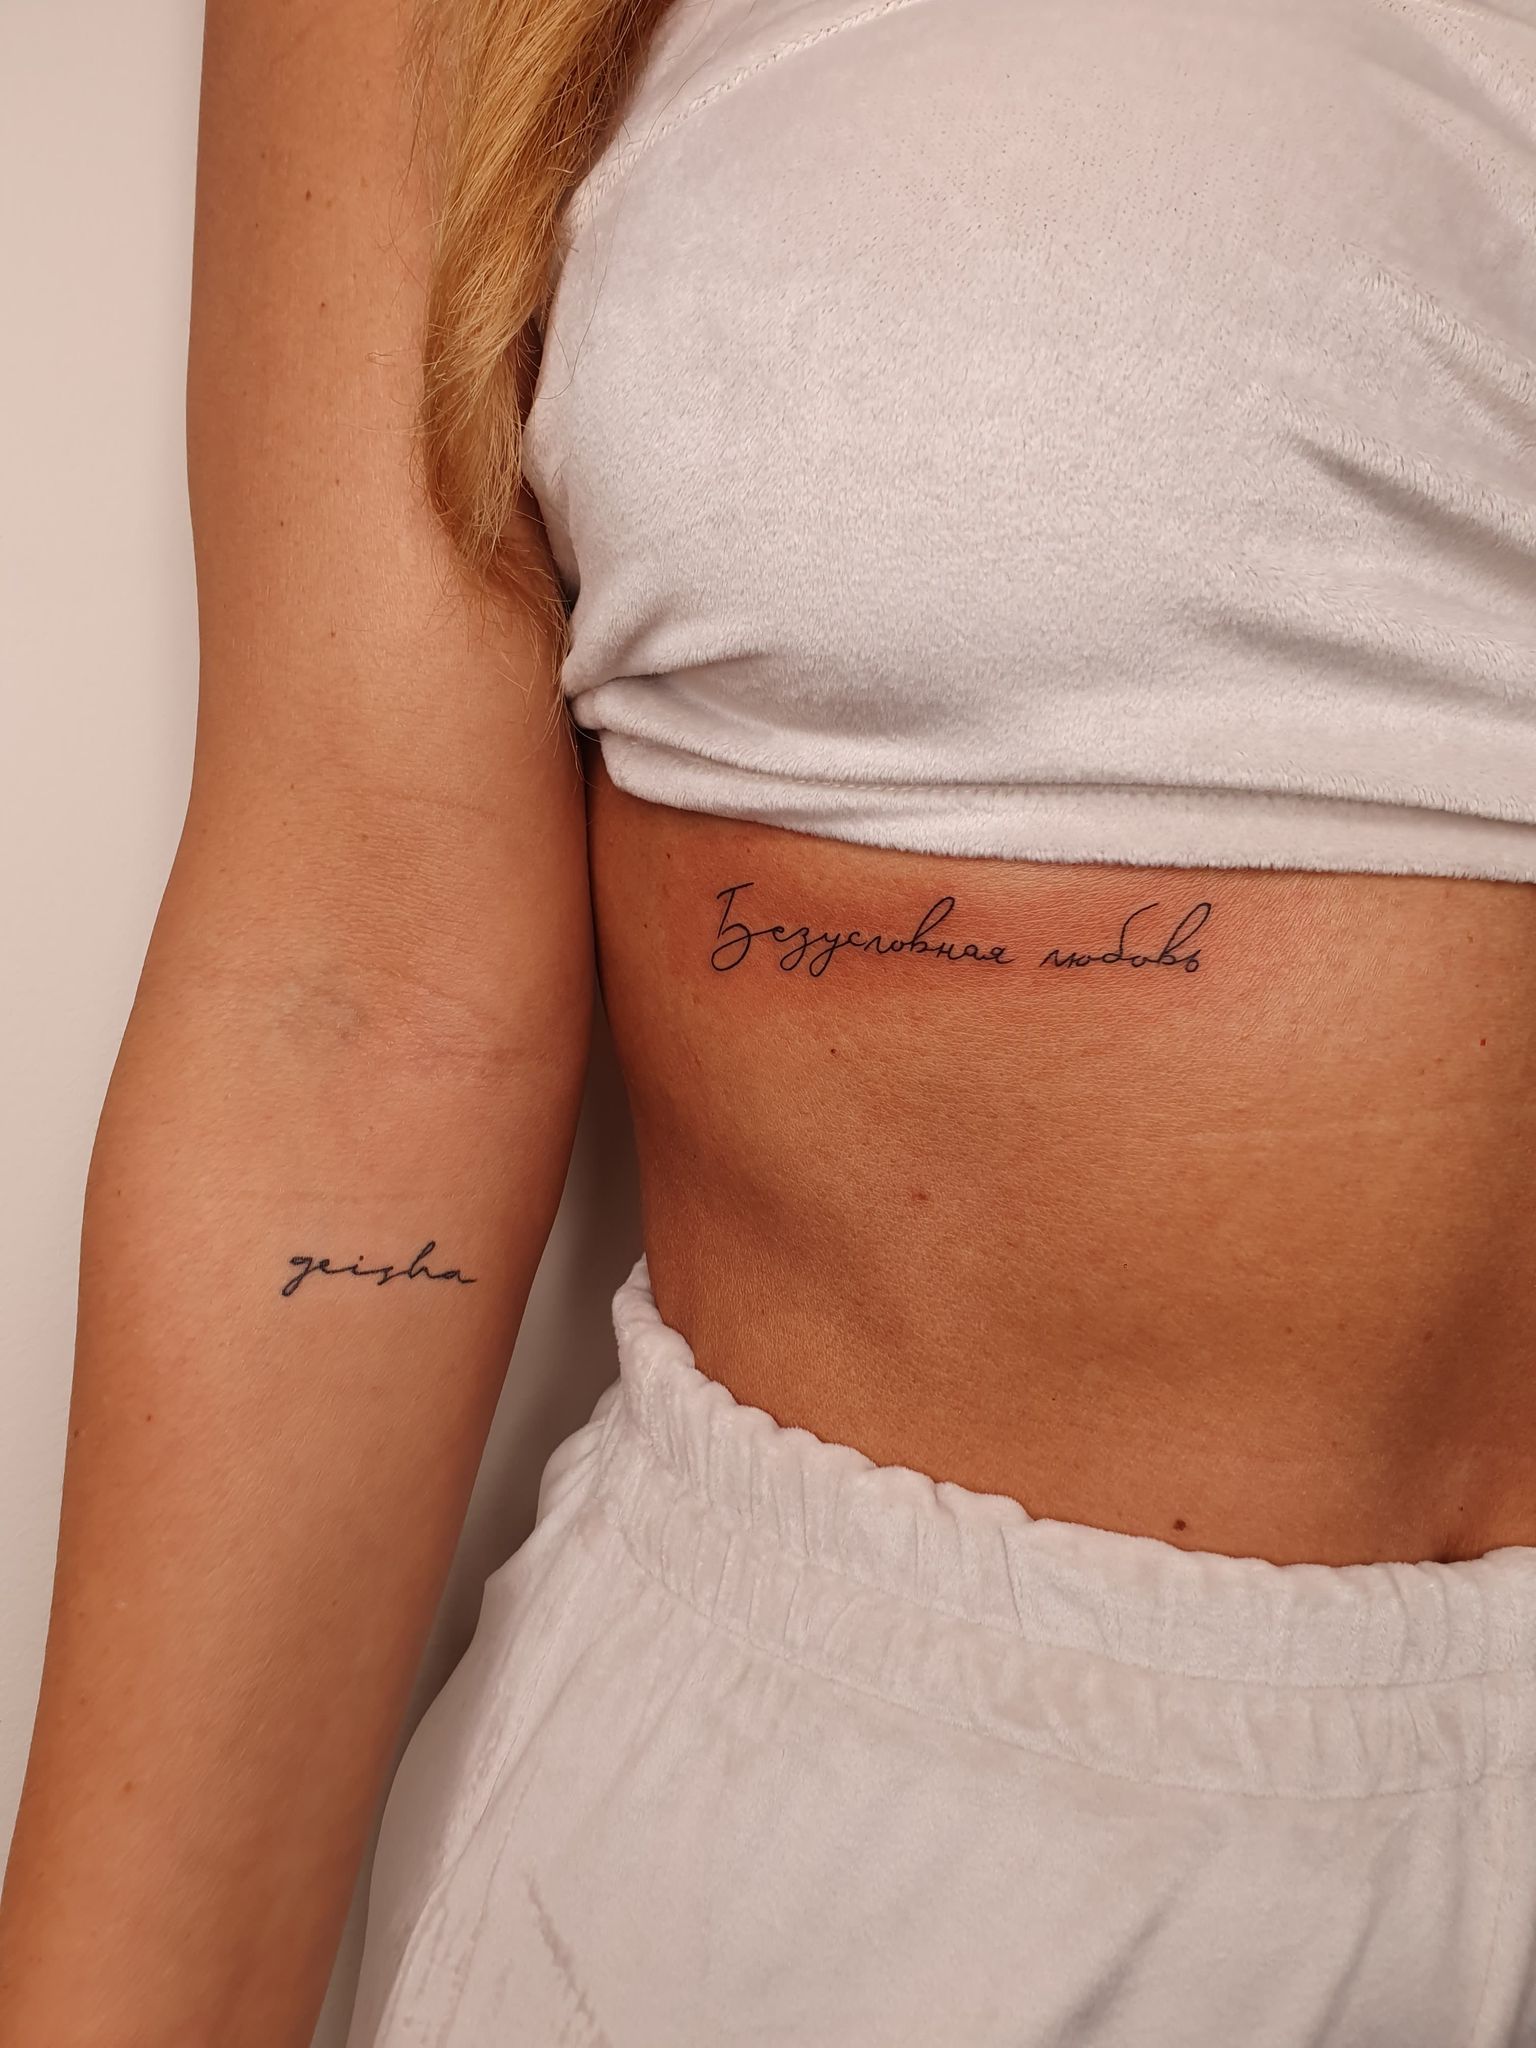 Rib Cage Tattoos for Women  Thoughtful Tattoos